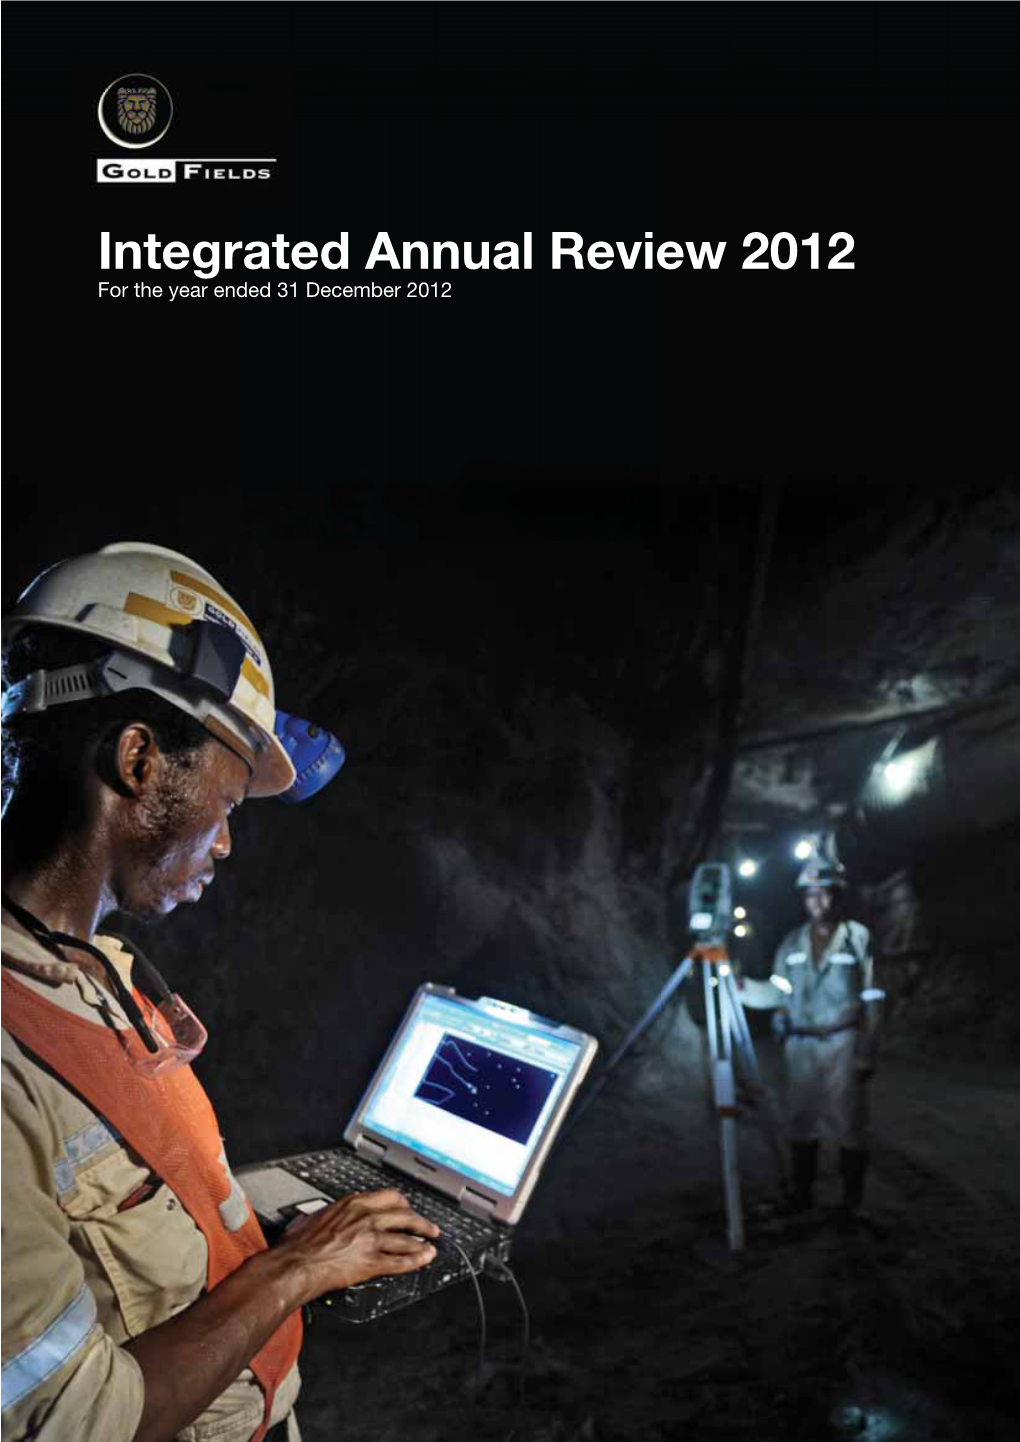 Integrated Annual Review 2012 for the Year Ended 31 December 2012 “If We Cannot Mine Safely, We Will Not Mine” Gold Fields Safety Value